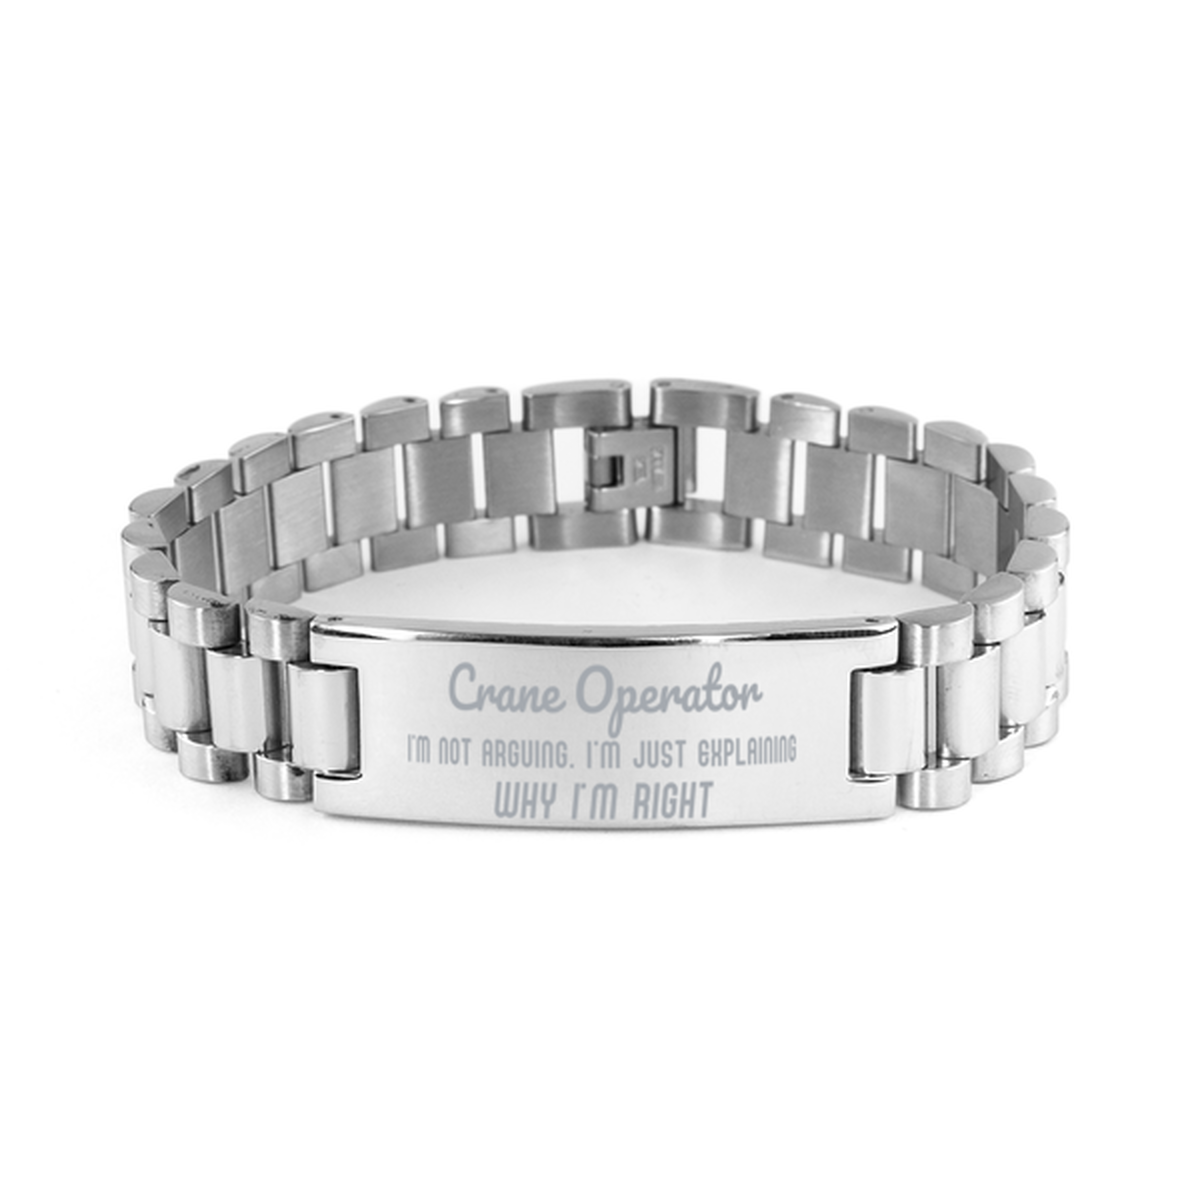 Crane Operator I'm not Arguing. I'm Just Explaining Why I'm RIGHT Ladder Stainless Steel Bracelet, Graduation Birthday Christmas Crane Operator Gifts For Crane Operator Funny Saying Quote Present for Men Women Coworker